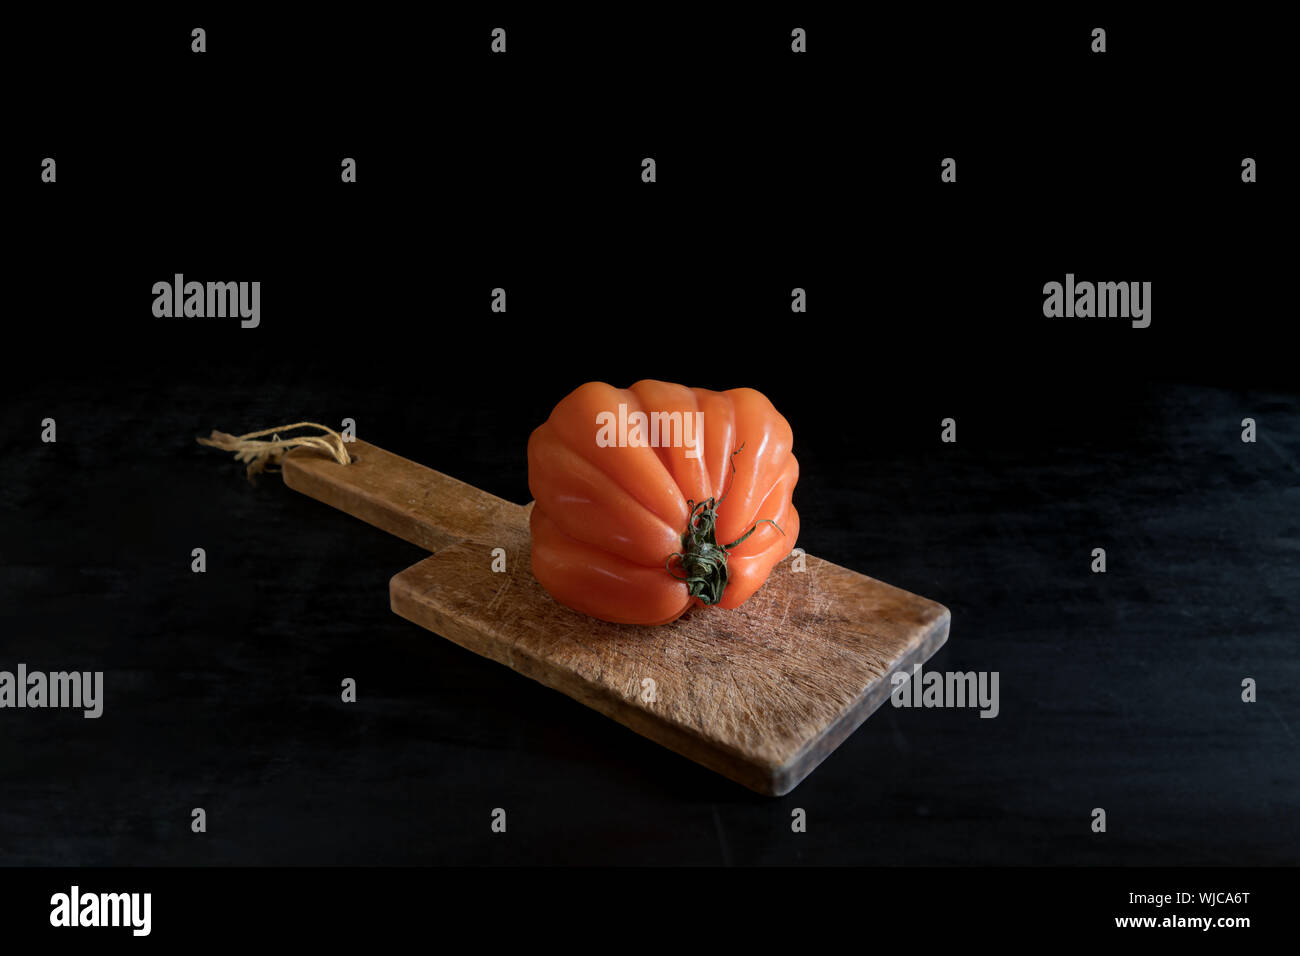 Colorful juicy ugly tomato on wooden cutting board on a black backgound, rustic style and low key with copy space Stock Photo